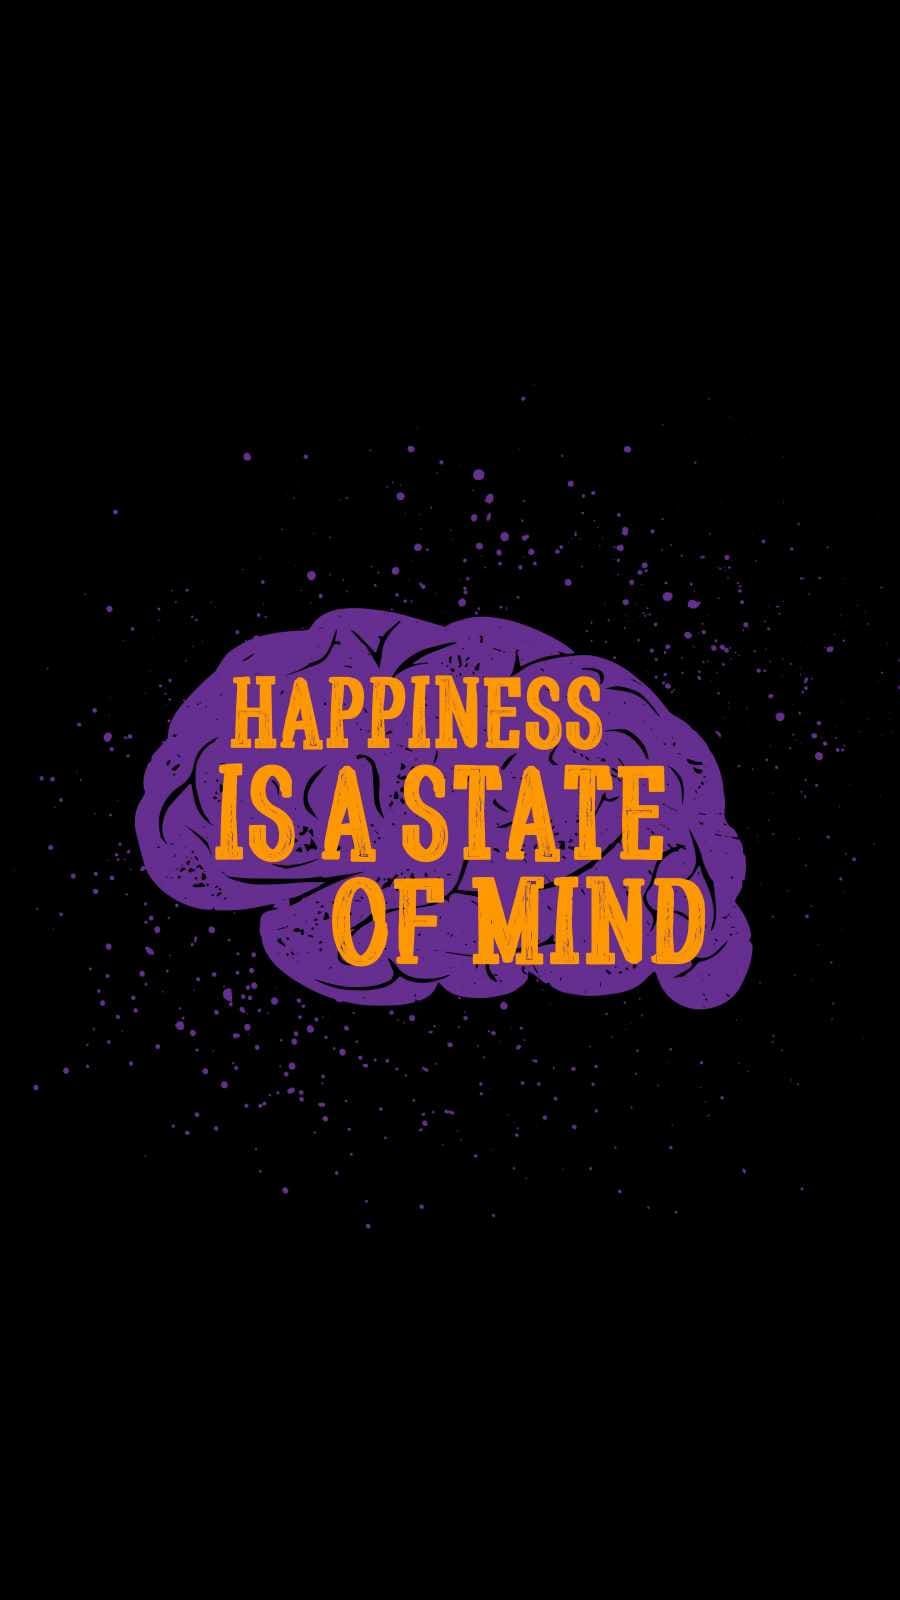 Happiness is a State of Mind wallpapers iphone